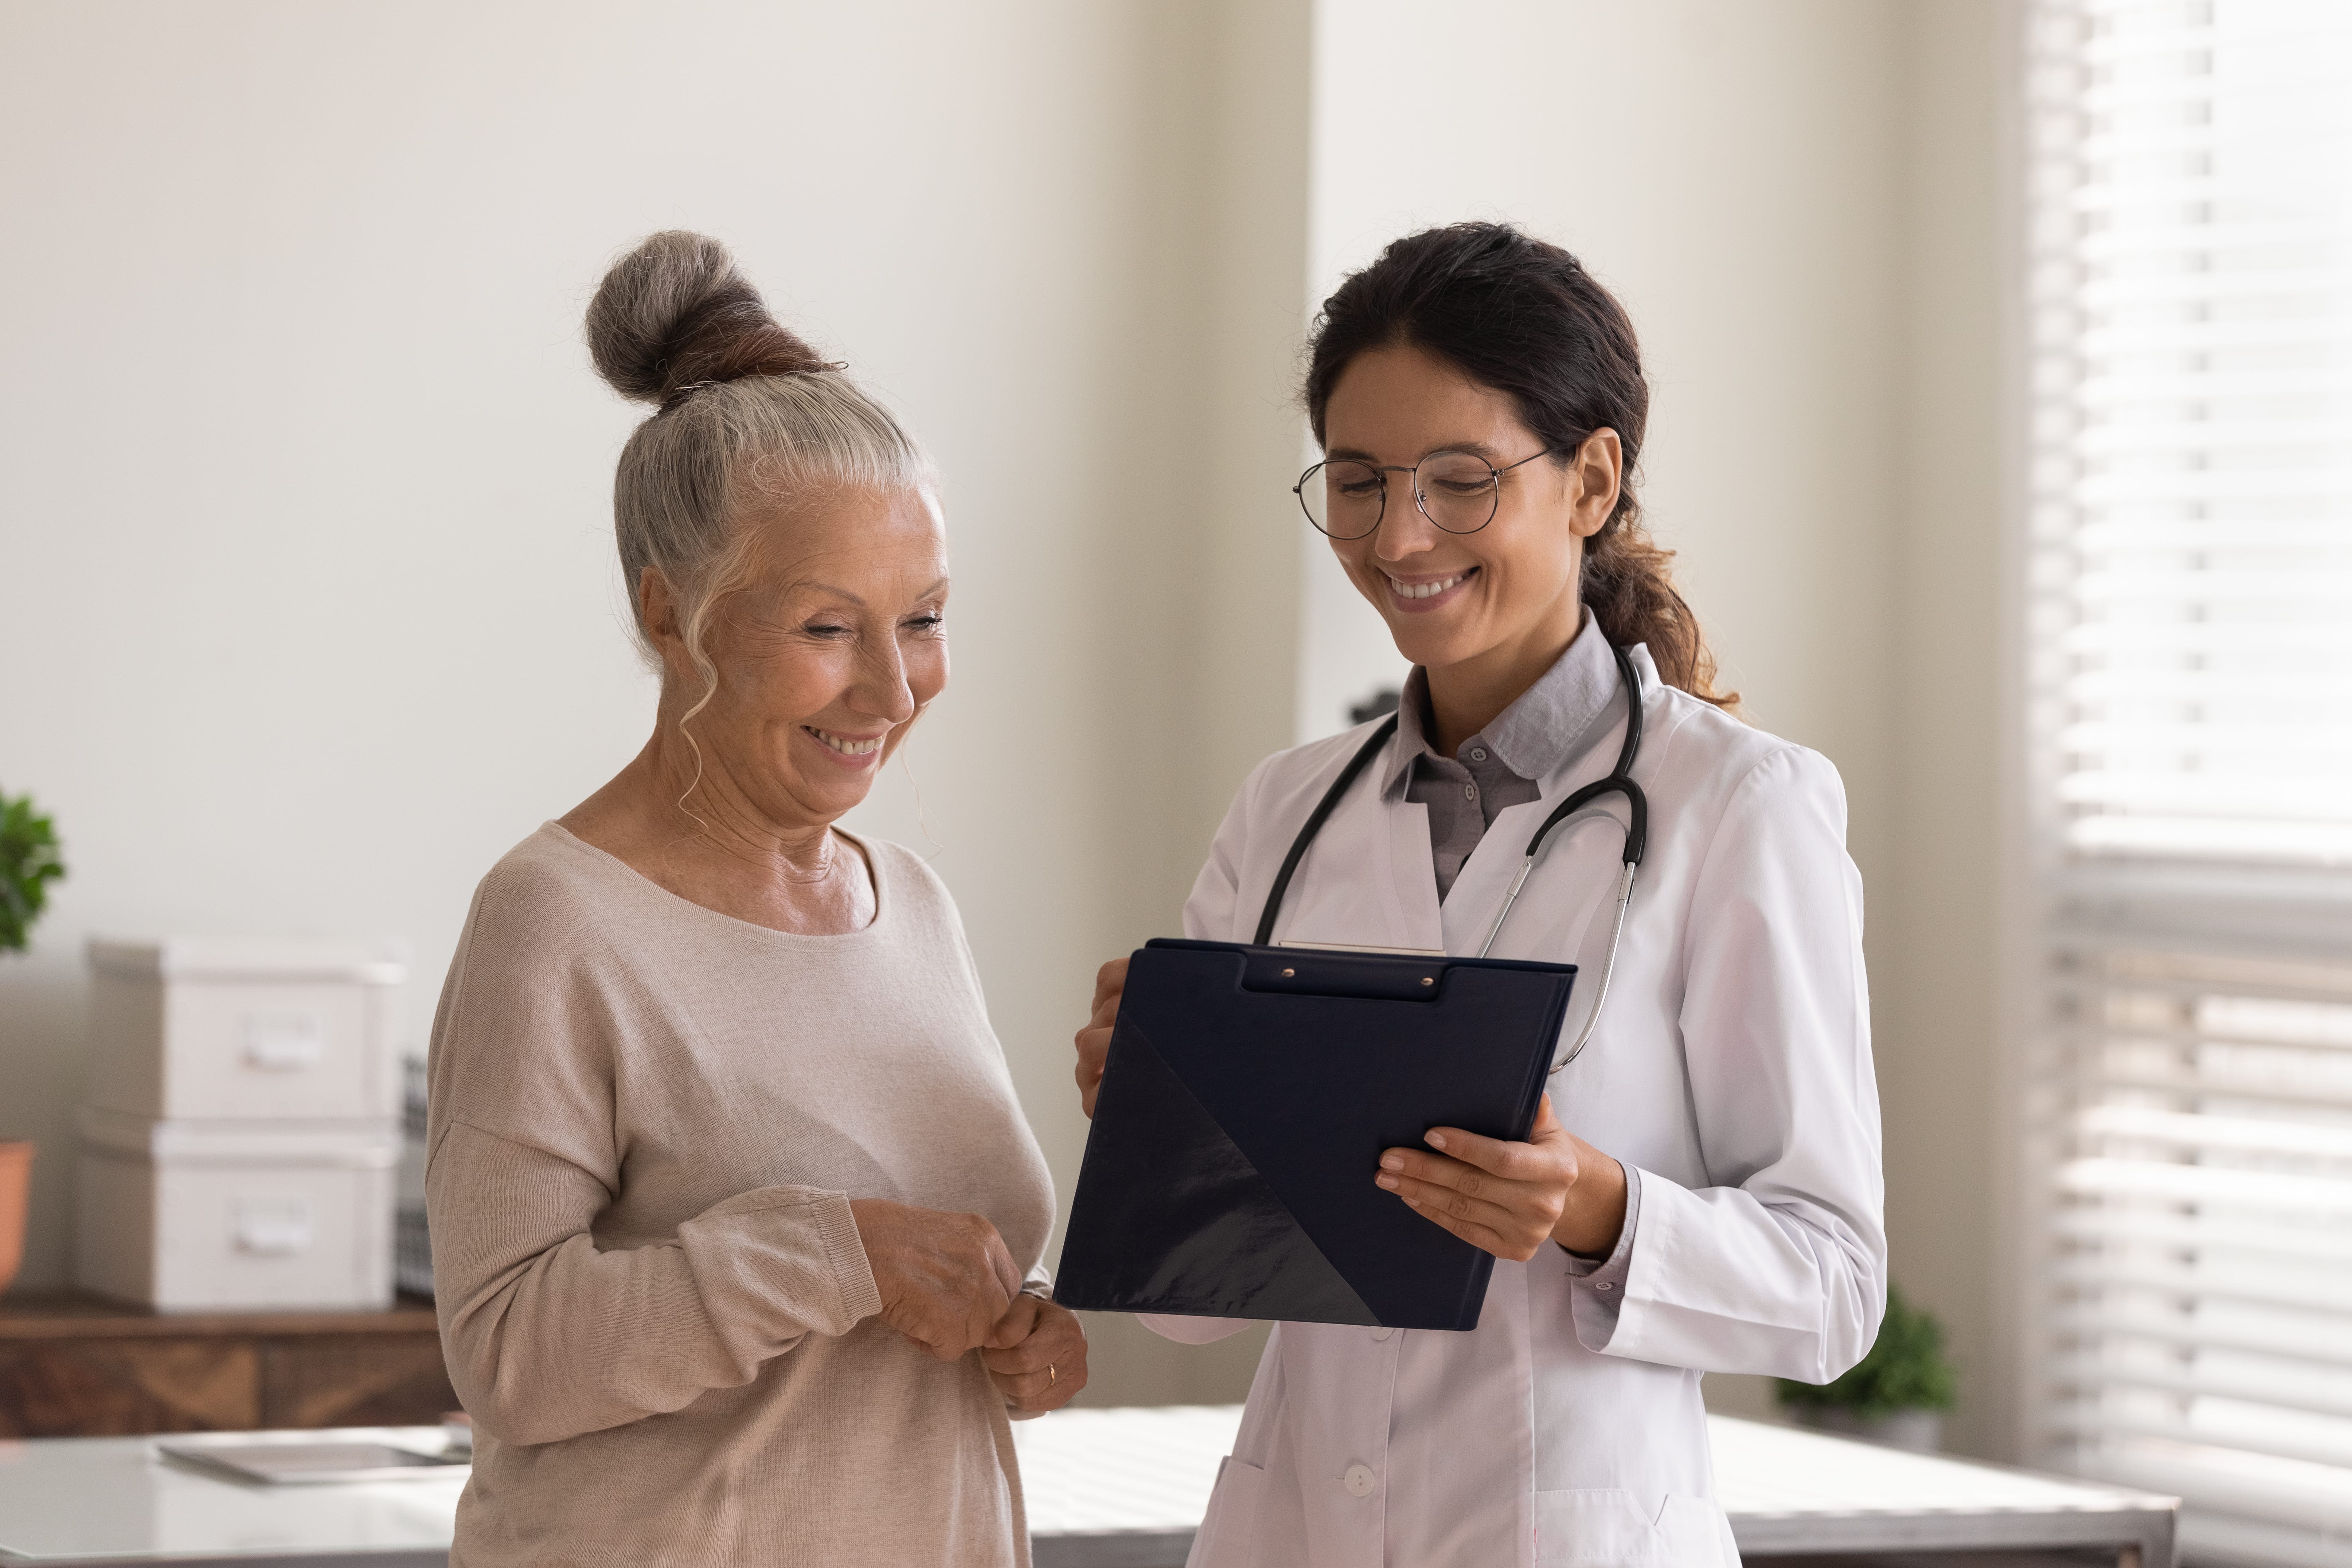 A caregiver consulting with a health care professional